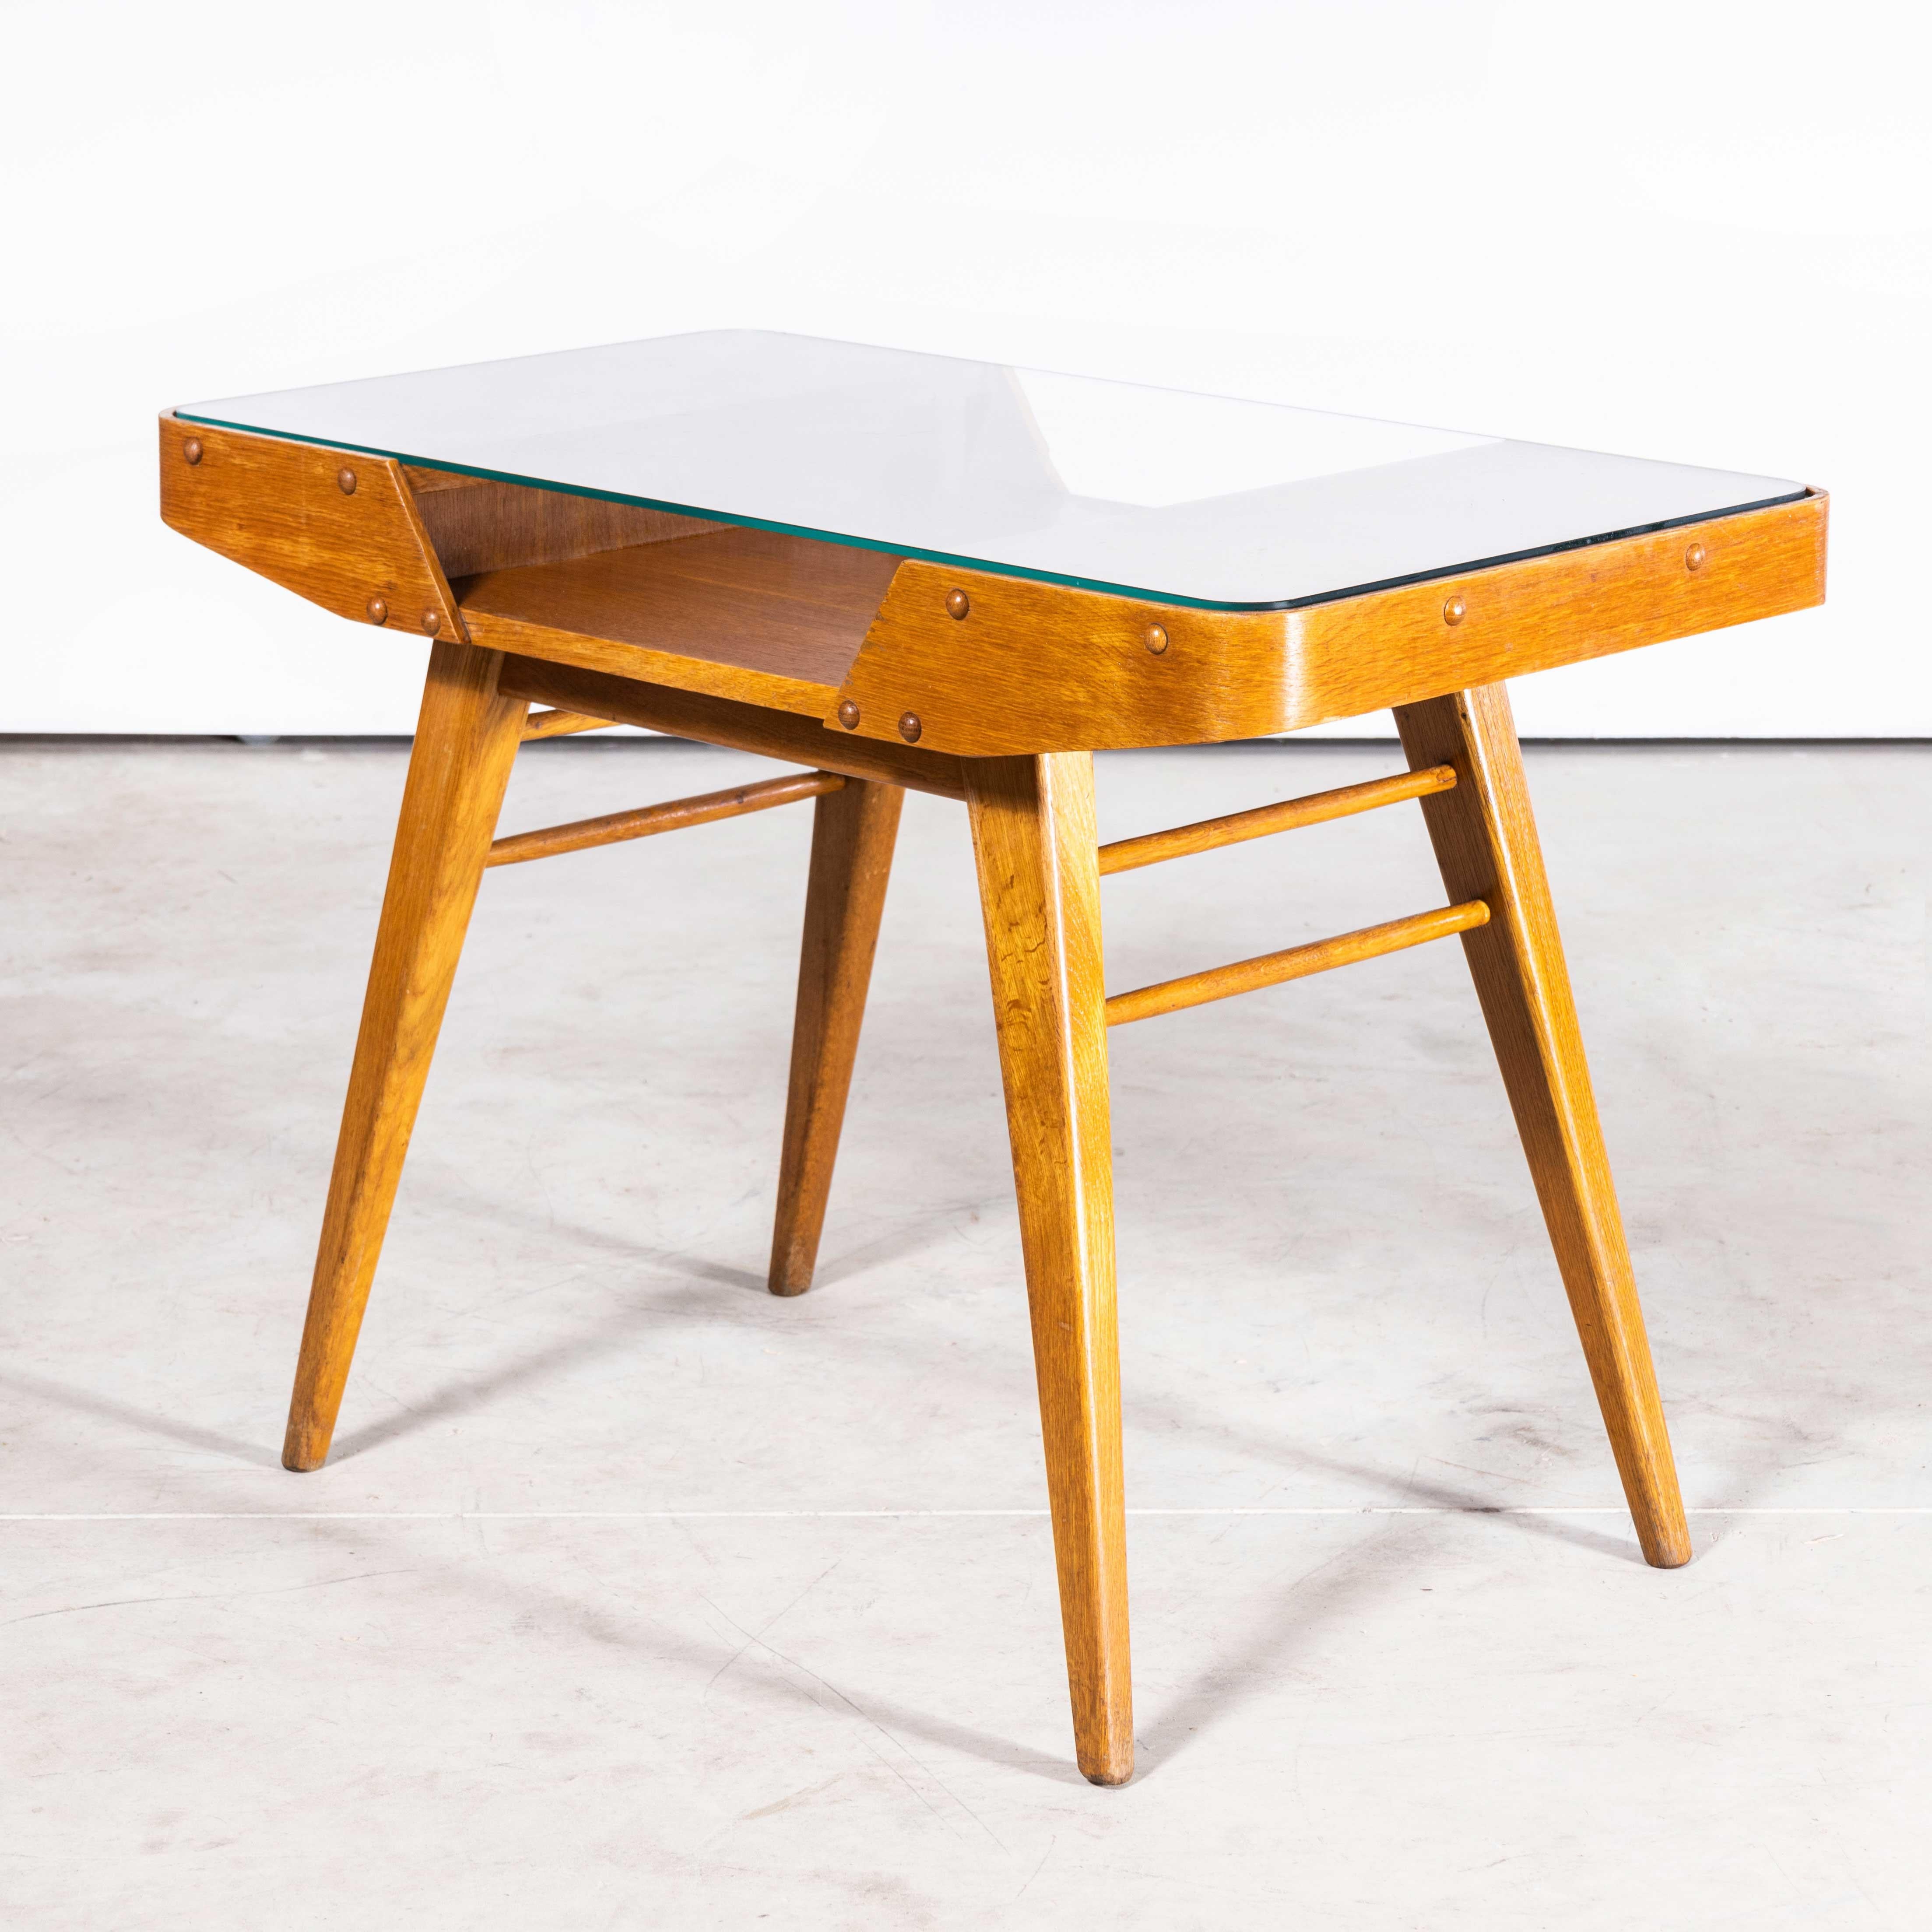 1950s Oak Framed Side Table With Glass Top
1950s Oak Framed Side Table With Glass Top. Beautiful simple and Classic midcentury side table sourced in the Czech Republic. Czech design will always be affiliated to the Bauhaus movement which inspired a